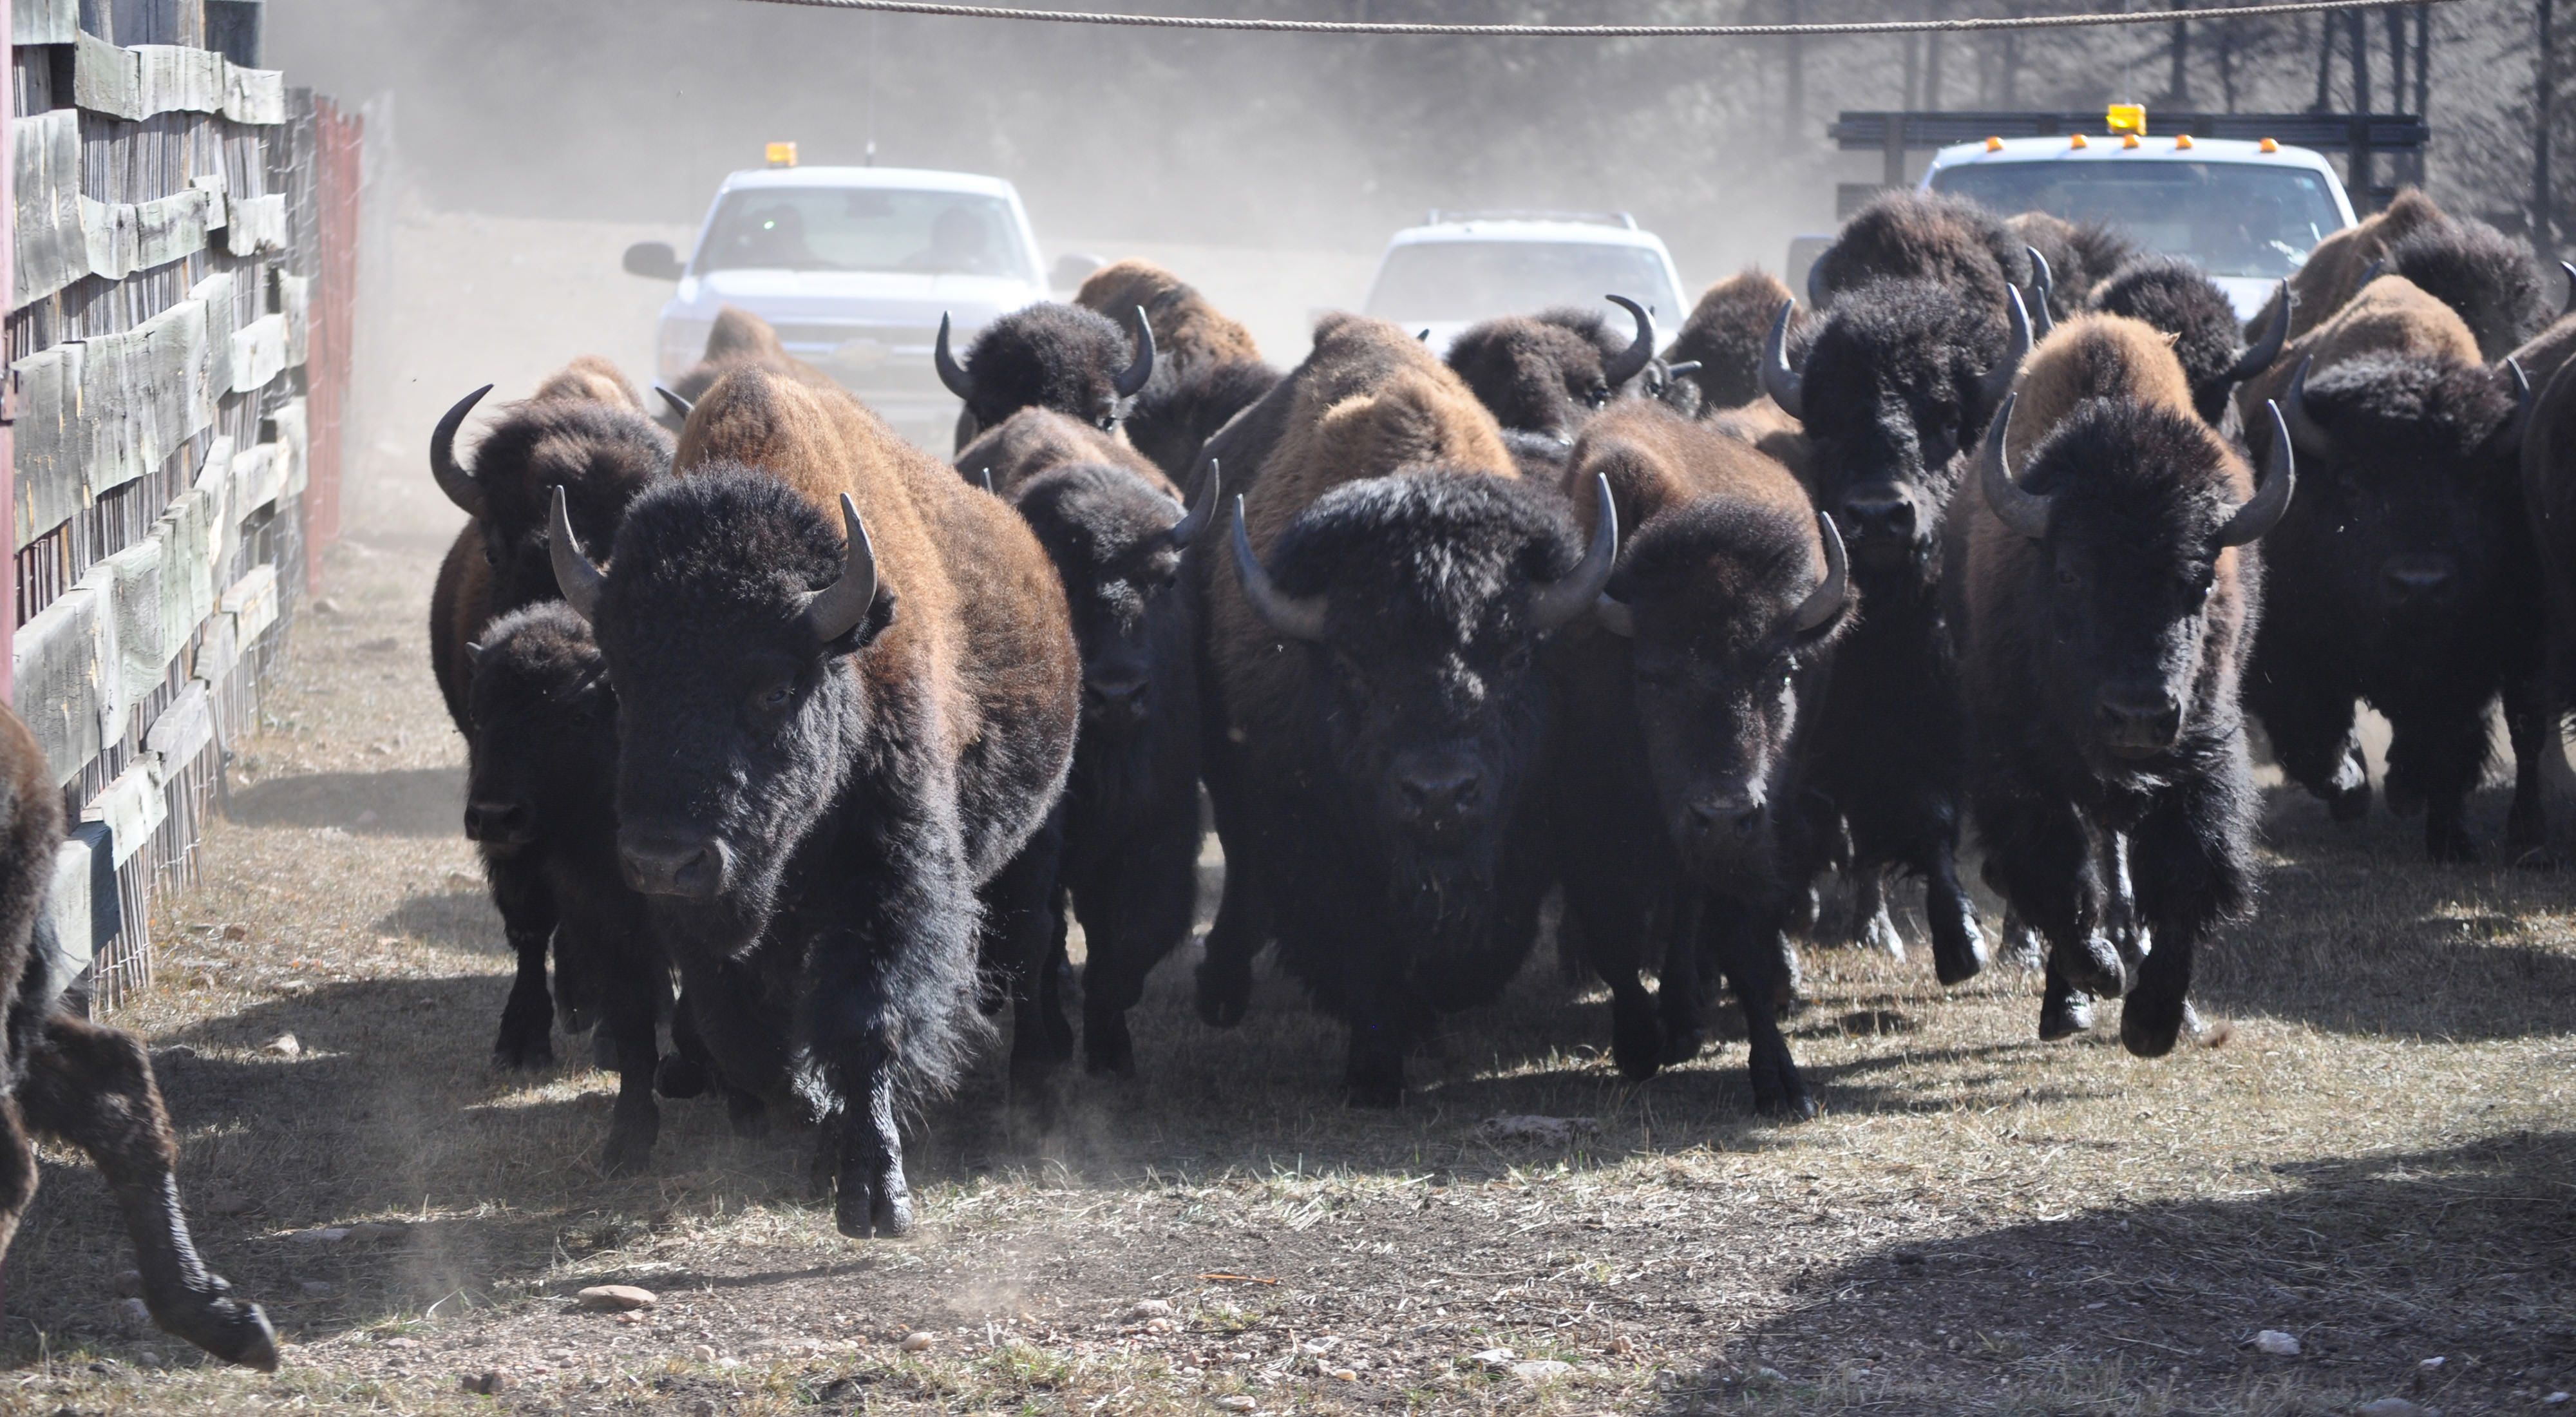 A small herd of bison are guided along a dirt road by TNC staff driving white pickup trucks.